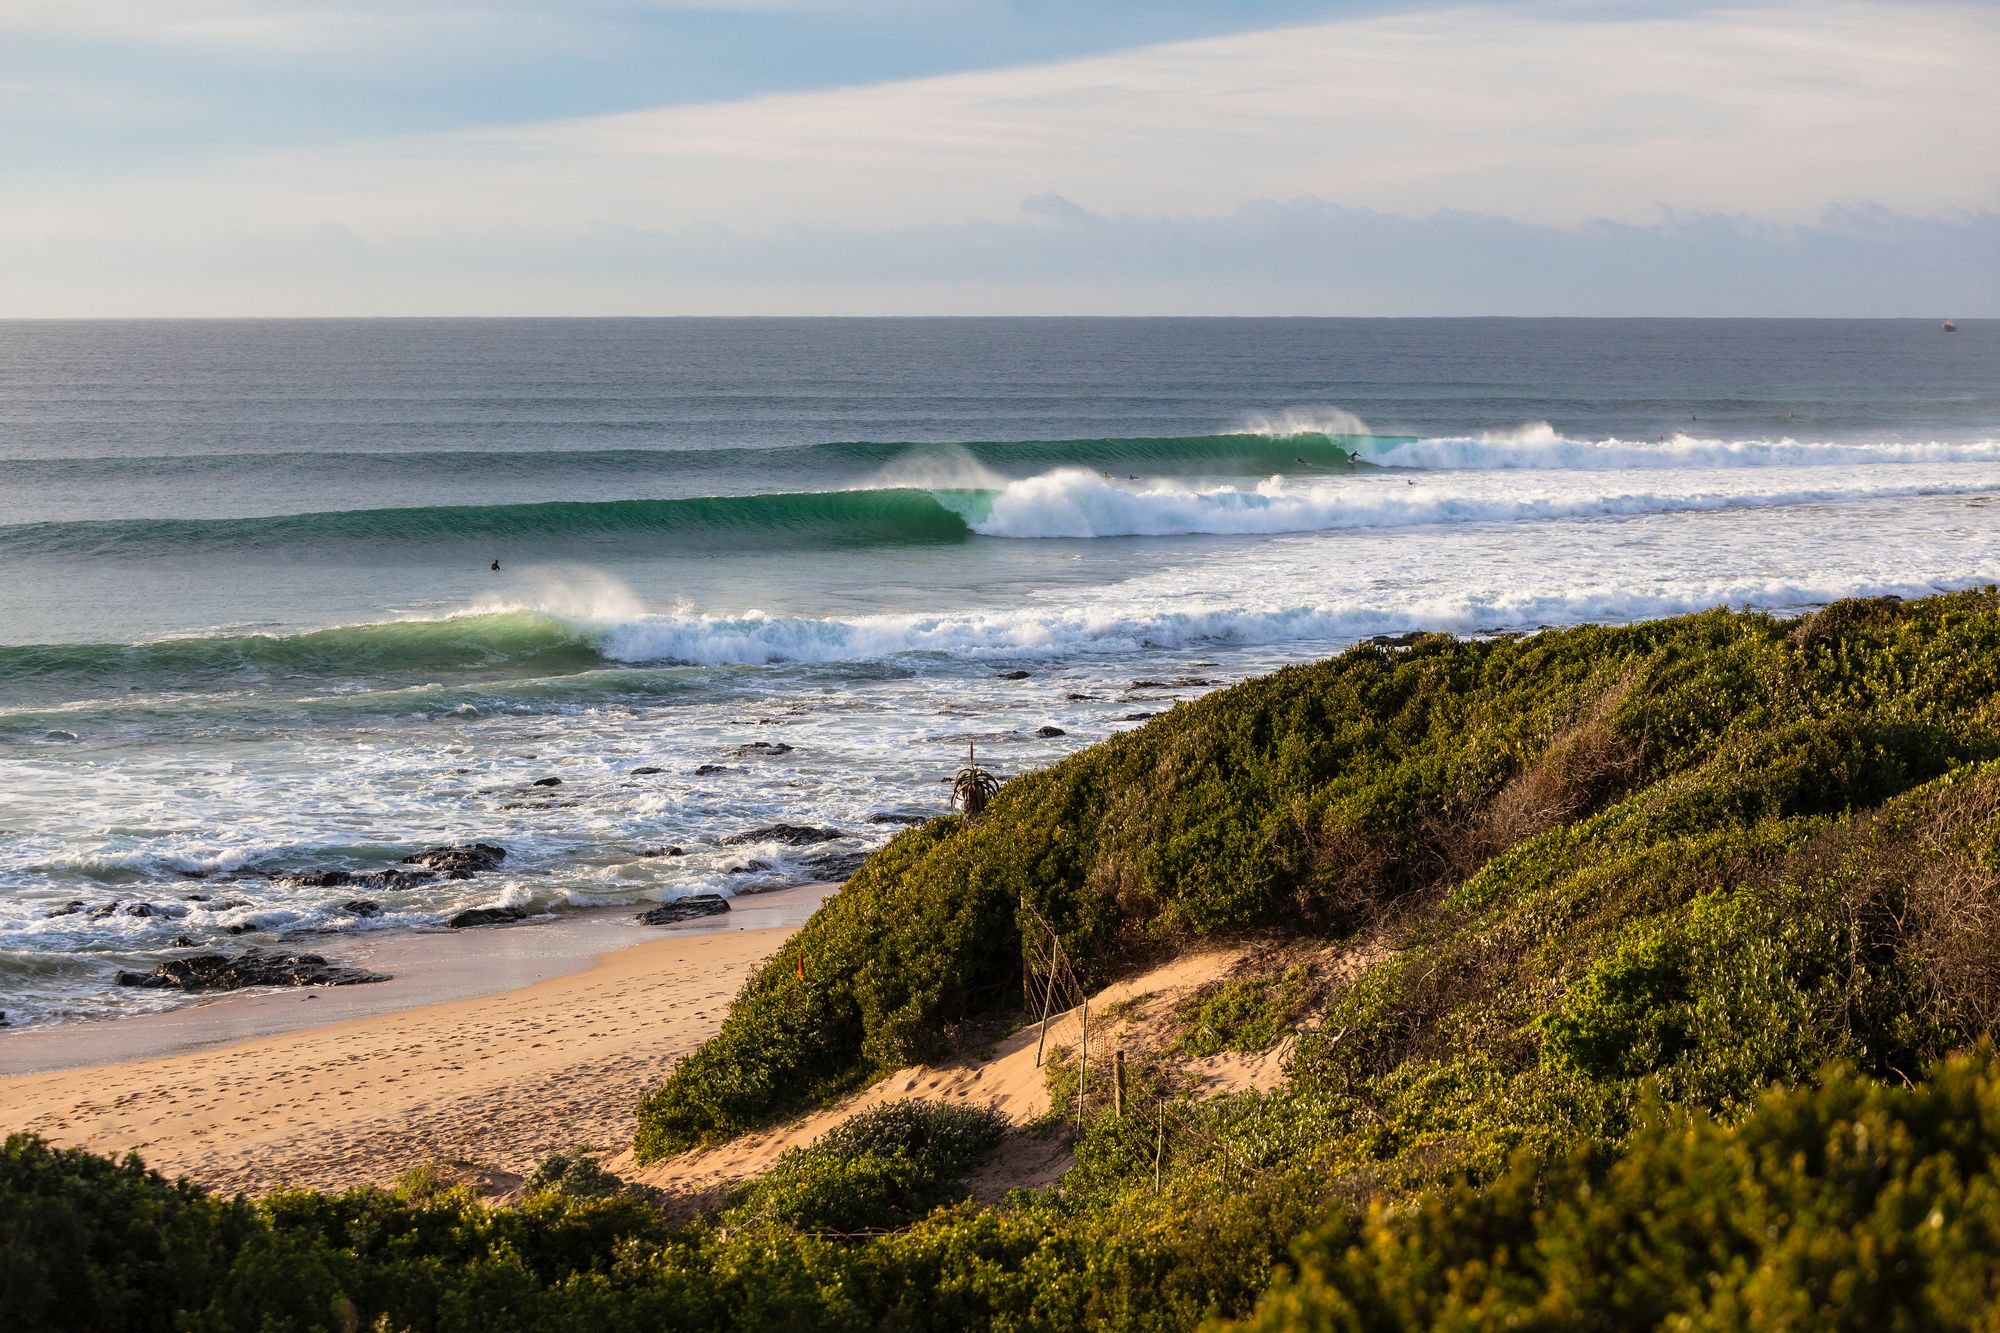 Firing righthand waves at Jeffreys Bay, South Africa